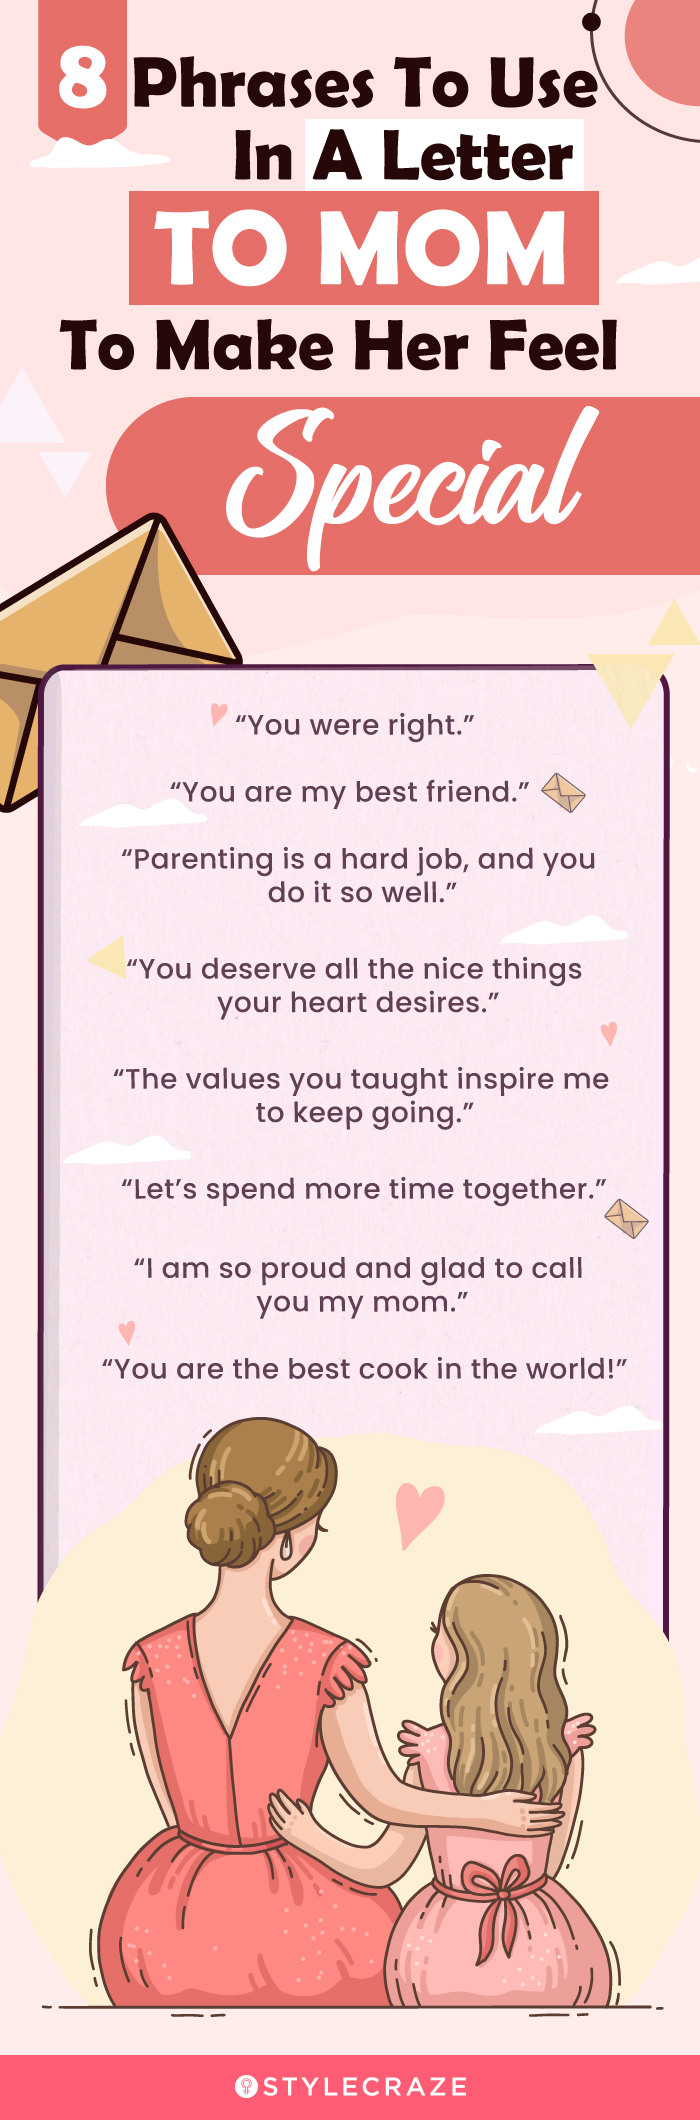 8 phrases to use in a letter to mom to make her feel (infographic)